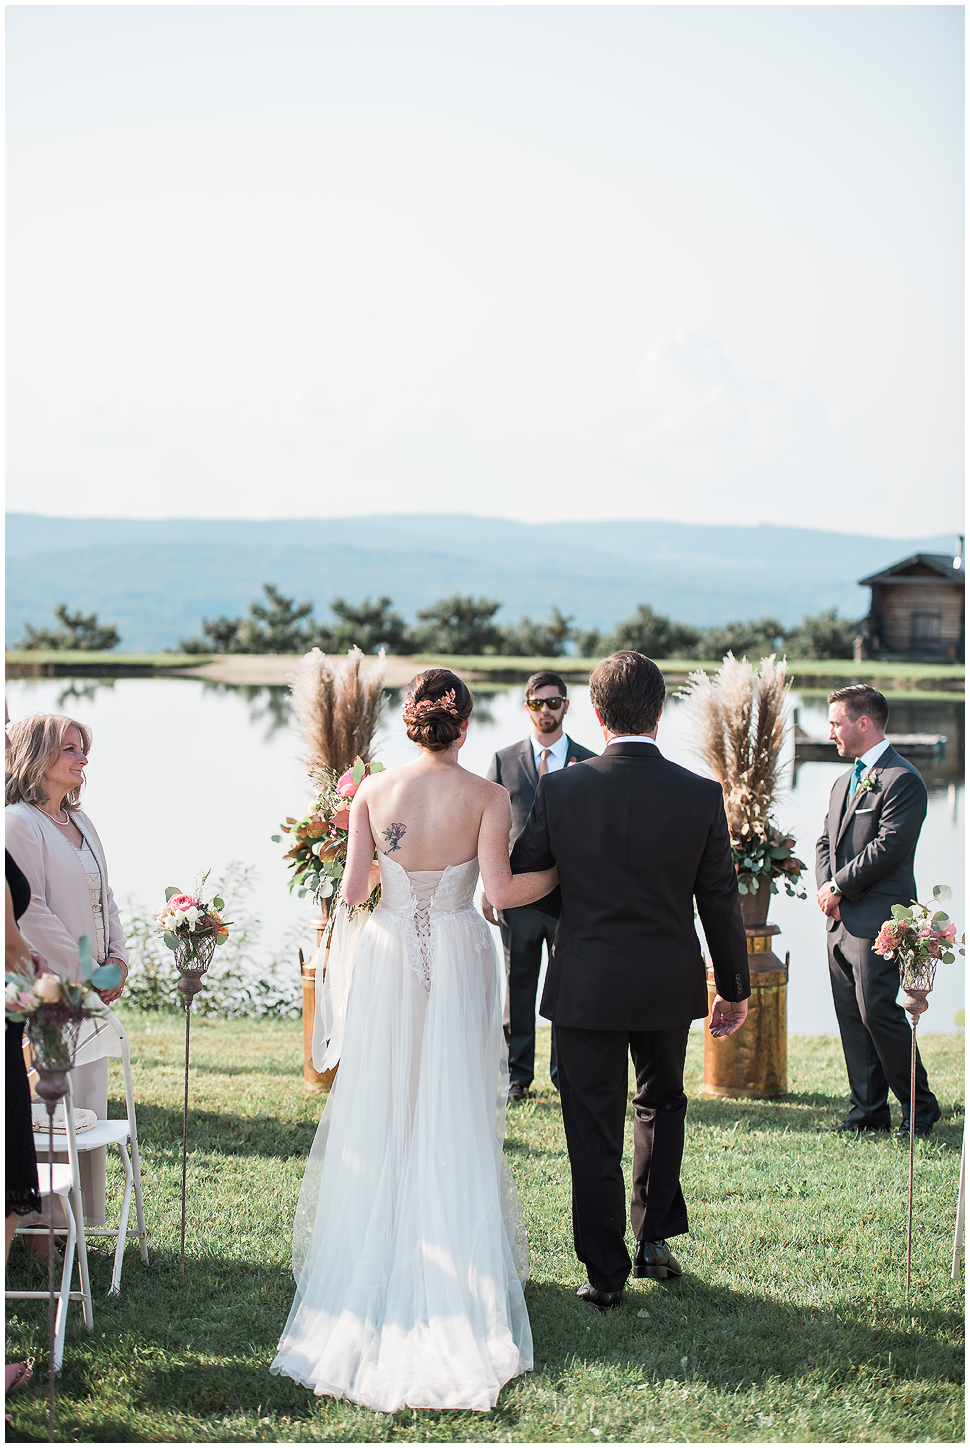 Shot from behind- Dad walks bride down the aisle at Alyson's Orchard Summer Wedding. 